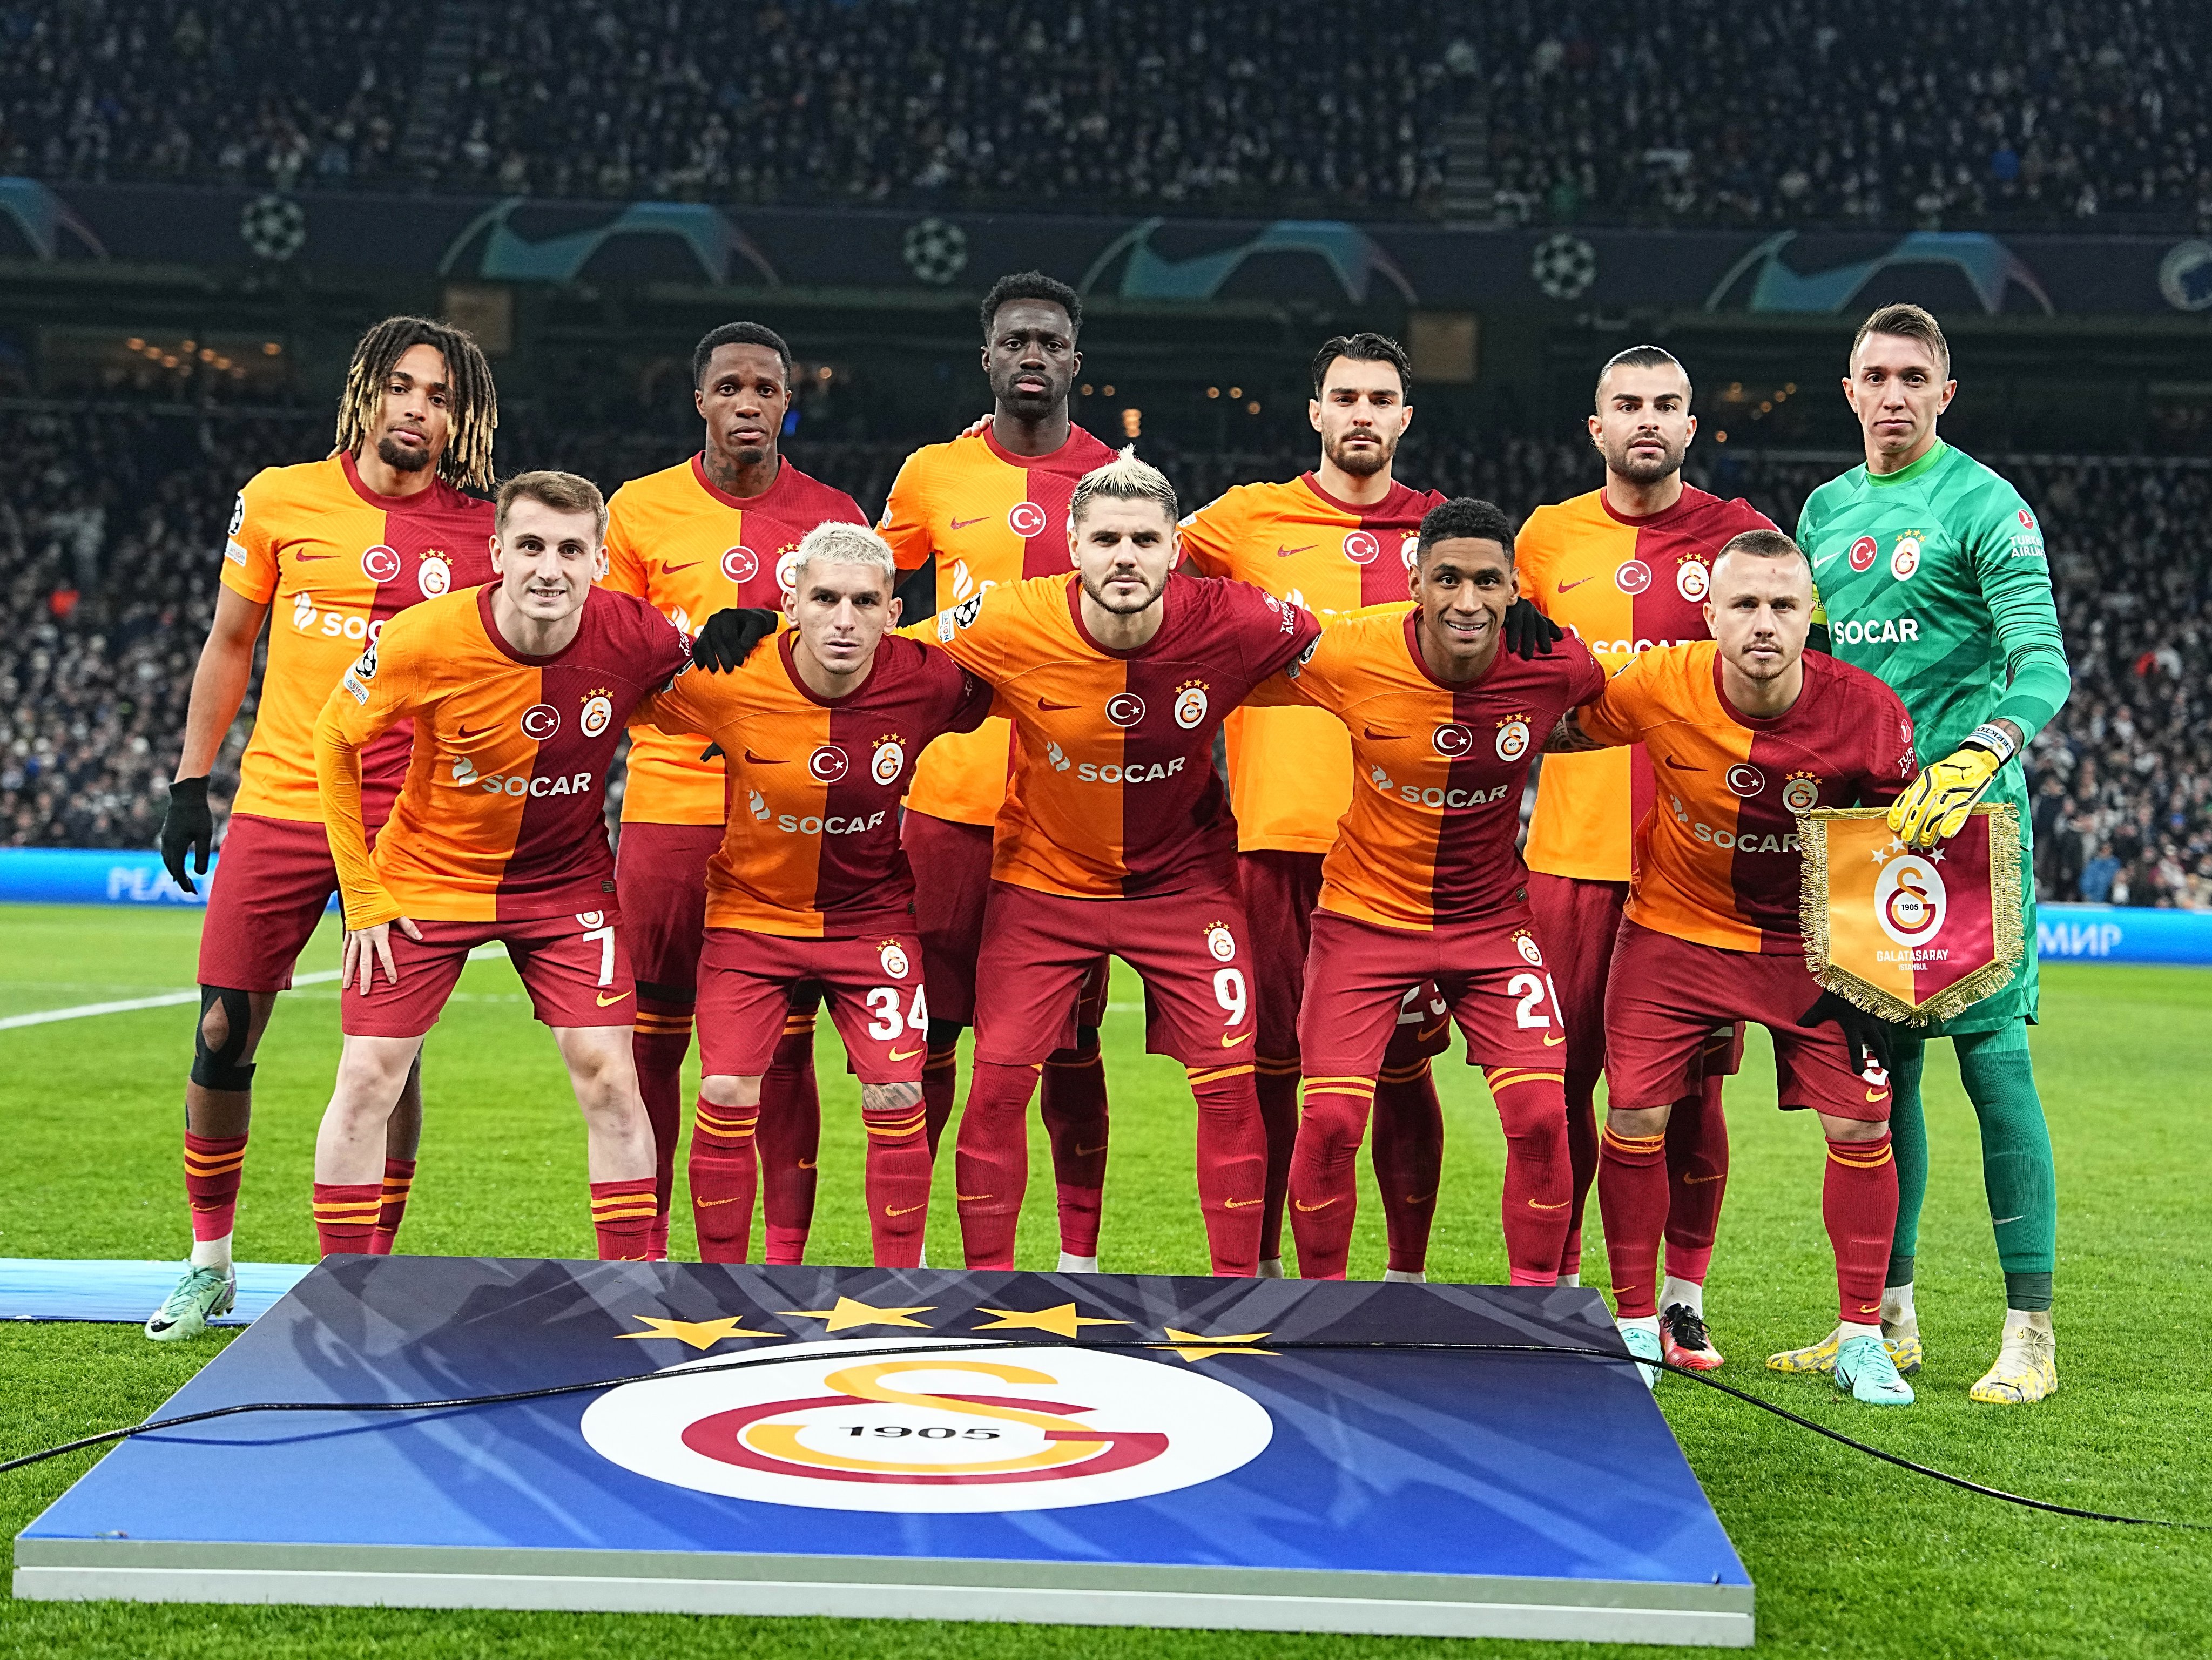 Galatasaray EN on X: Chin up, that was a good ride lads. Our